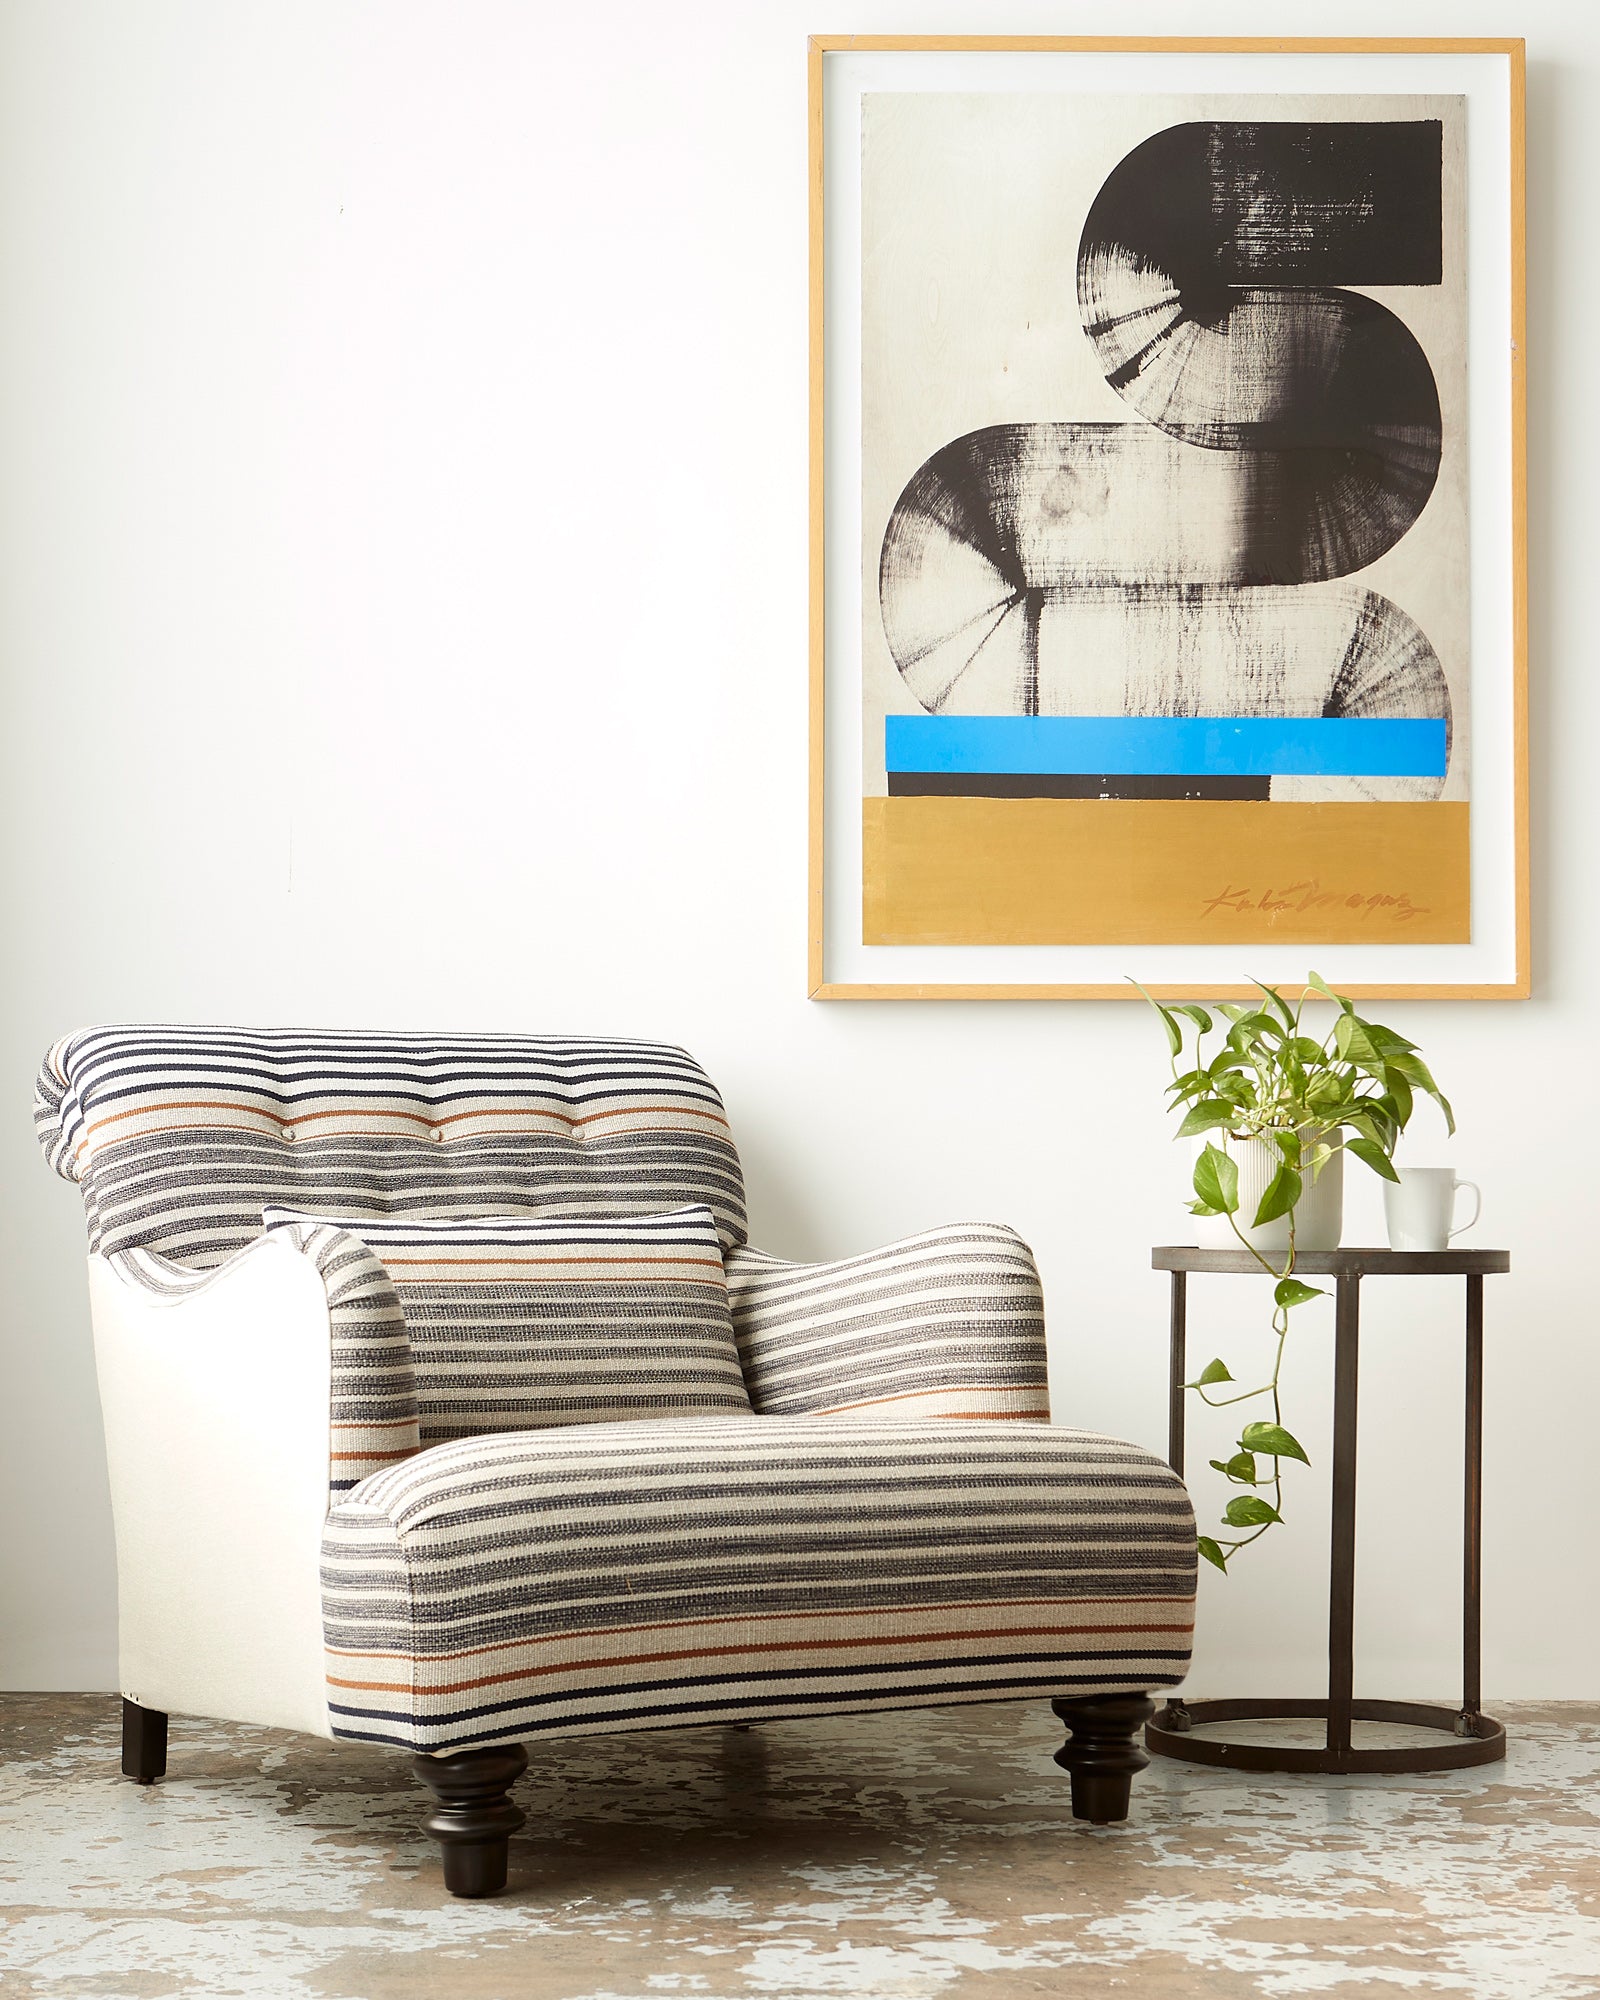  Acacia chair in Rayas Fino next to a round side table and art on the wall. Photographed in Rayas Fino. 